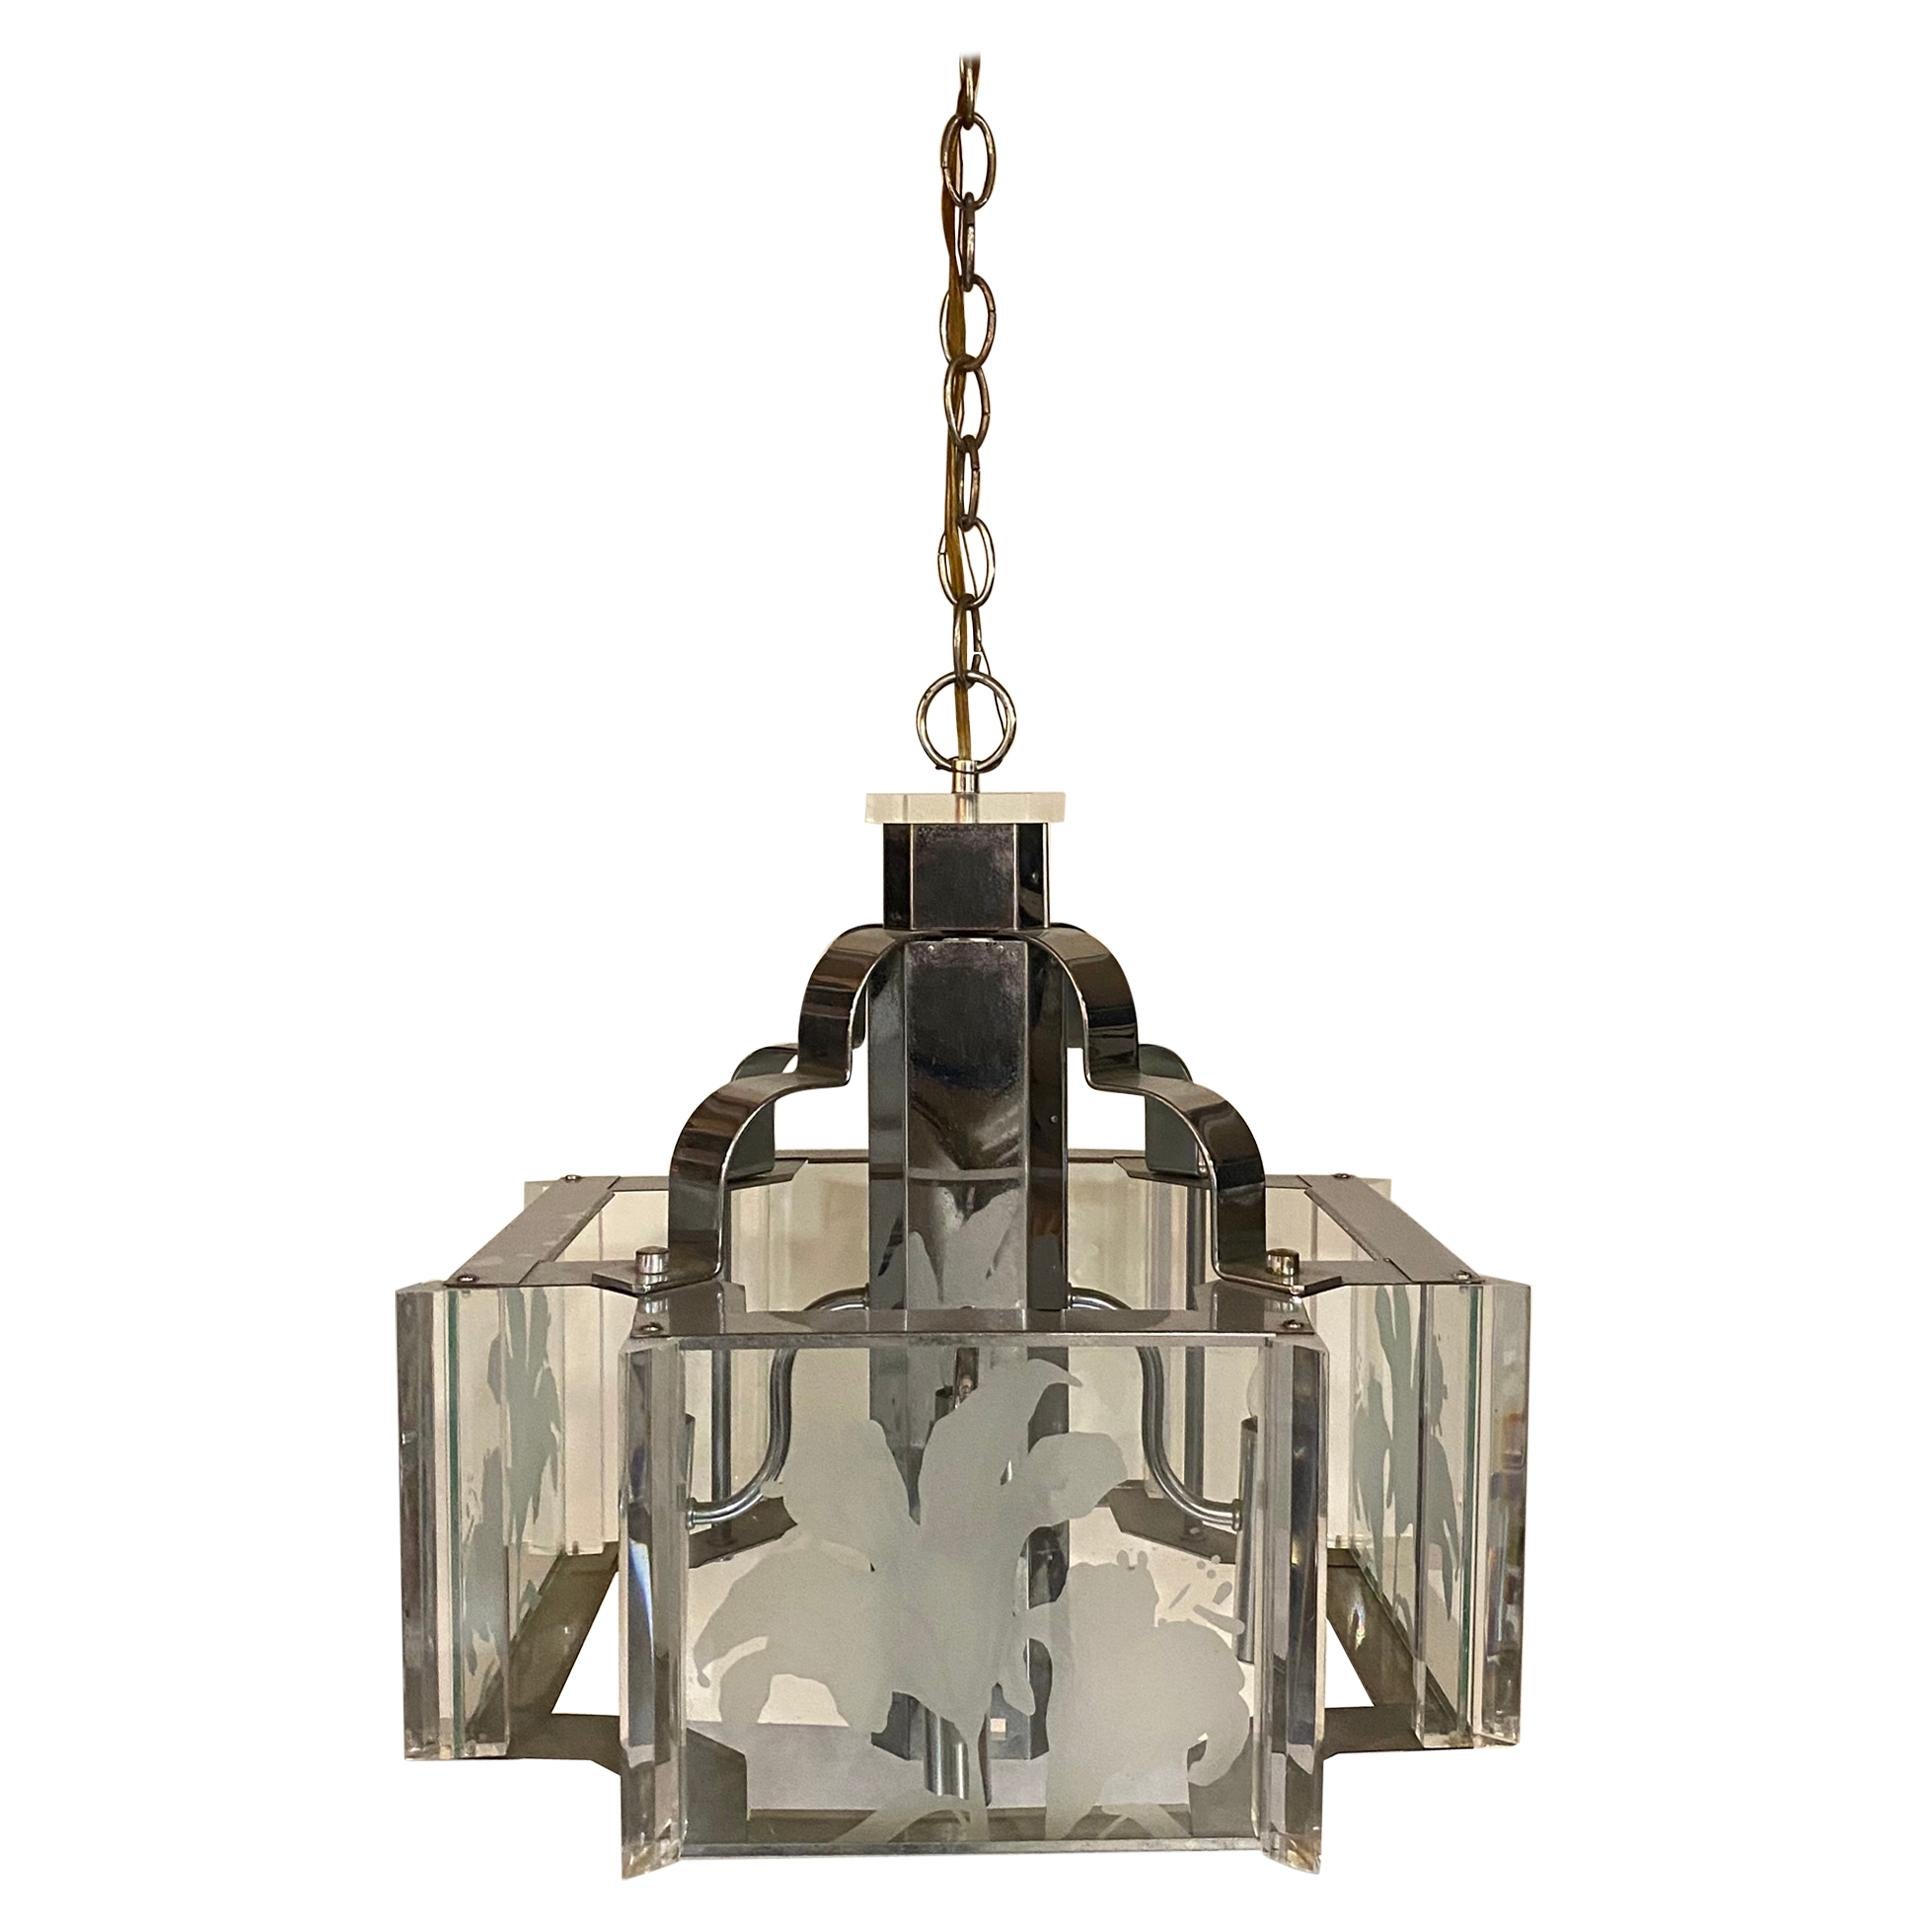 Frederick Raymond Art Deco Revival Chrome and Glass Chandelier For Sale